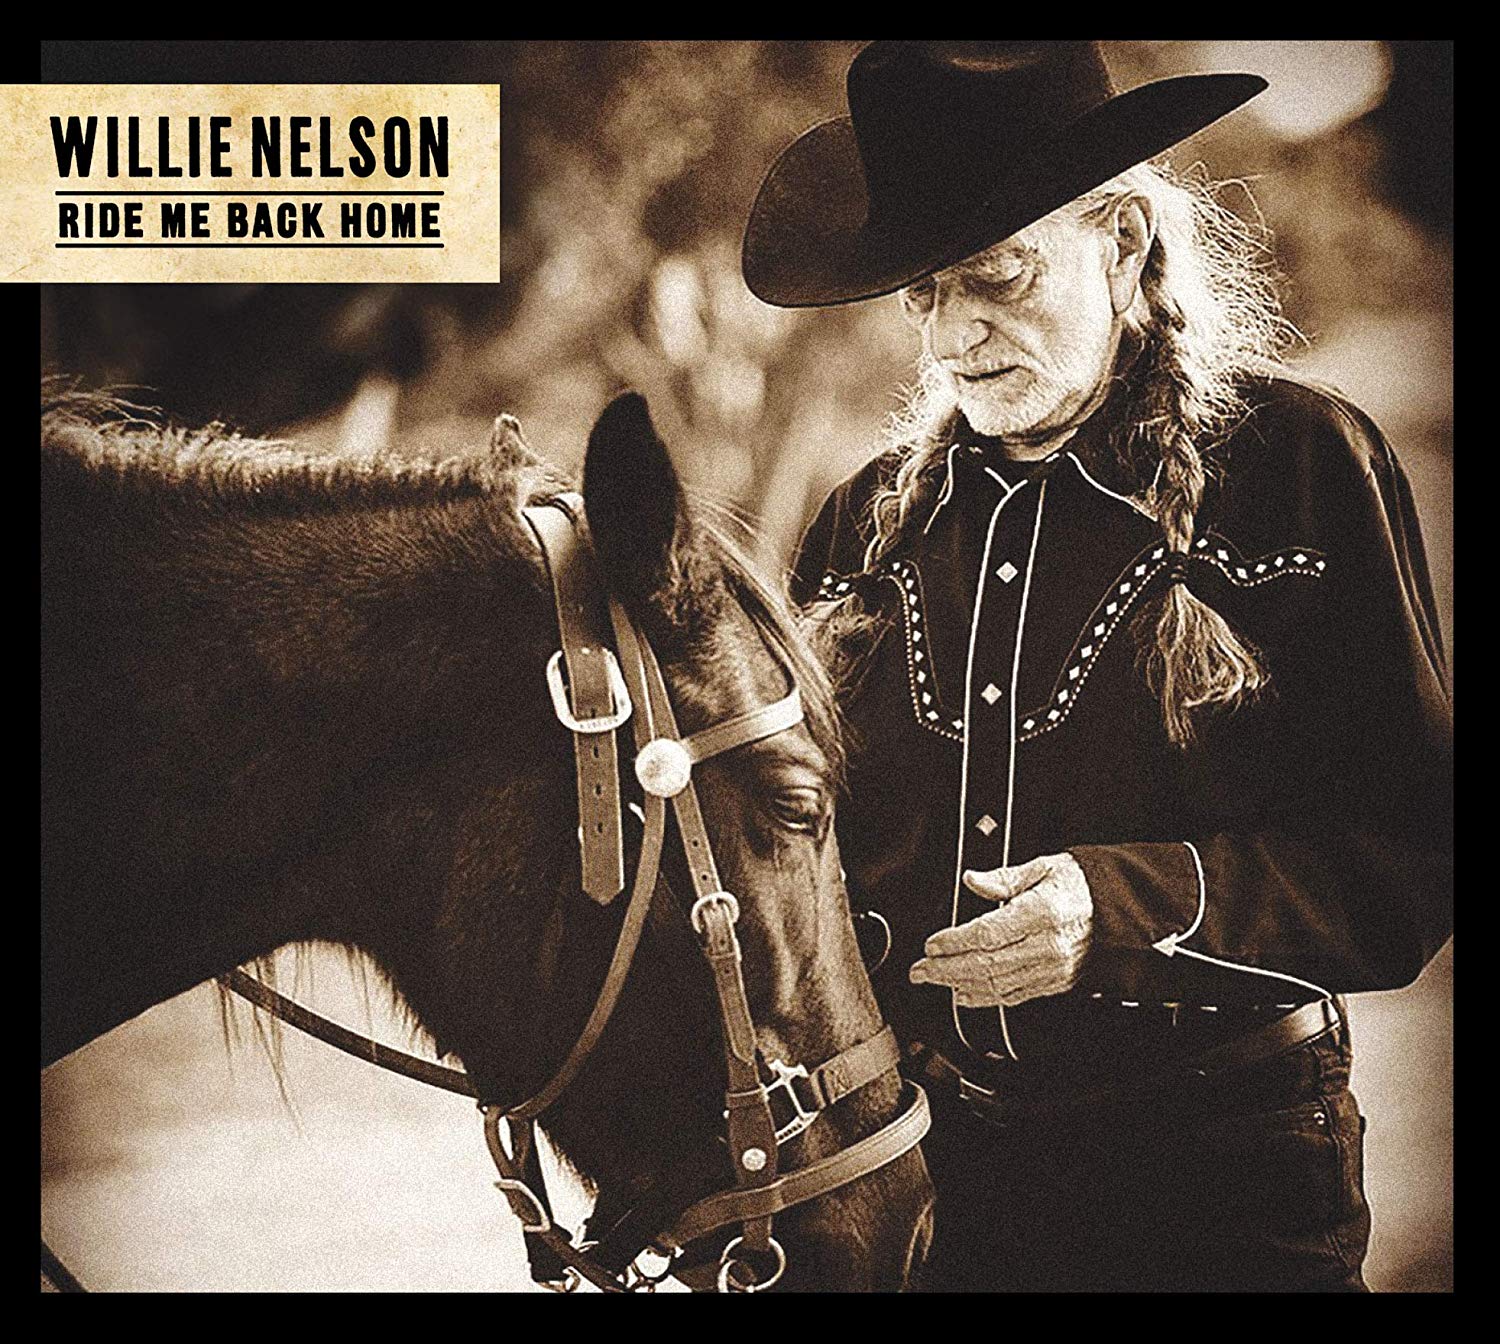 WILLIE NELSON / ウィリー・ネルソン / RIDE ME BACK HOME / ライド・ミー・バック・ホーム